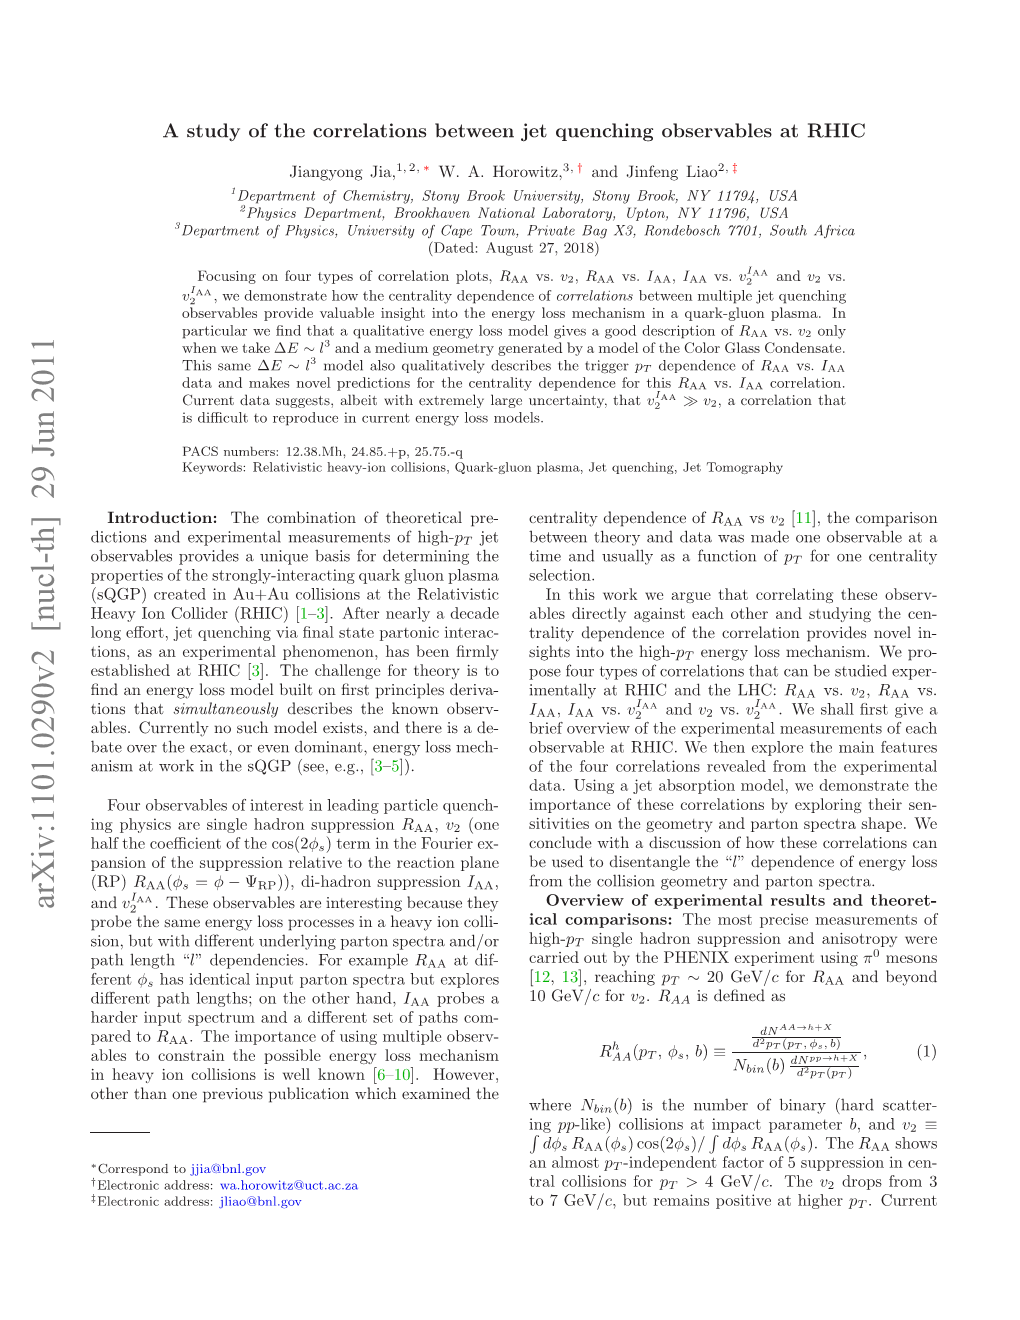 A Study of the Correlations Between Jet Quenching Observables at RHIC